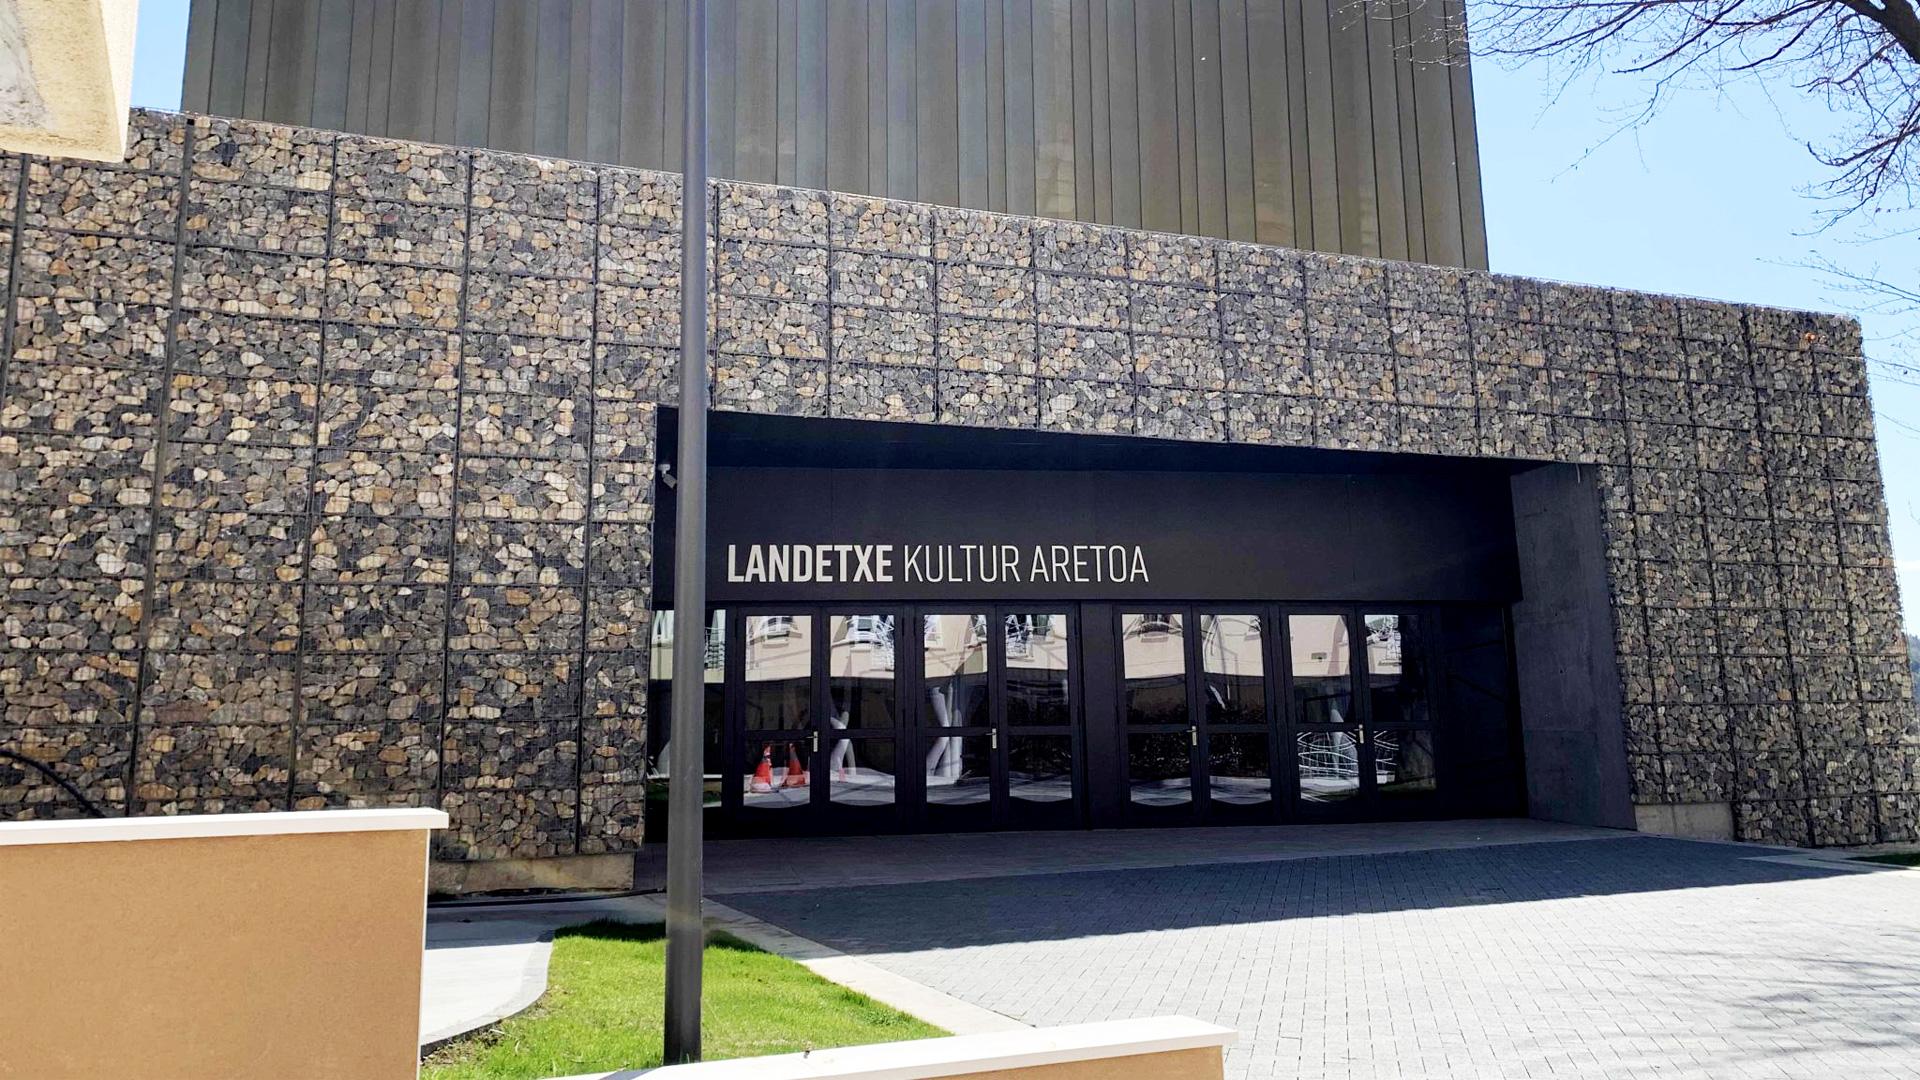 The new Landetxe Kultur Aretoa Theatre in Spain lights up its stage with PROLIGHTS
